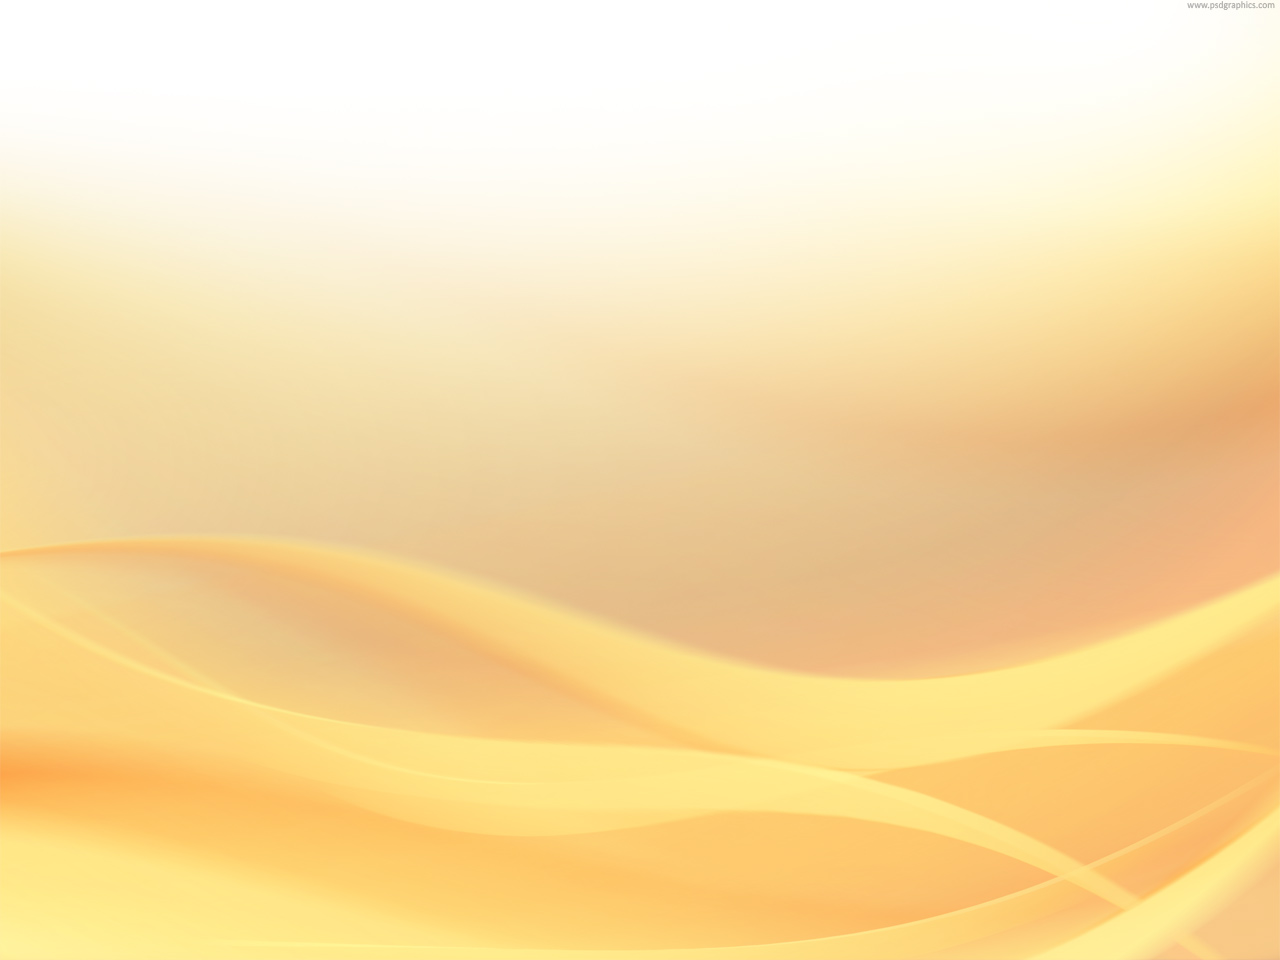 Medium size preview 1280x960px Yellow waves background